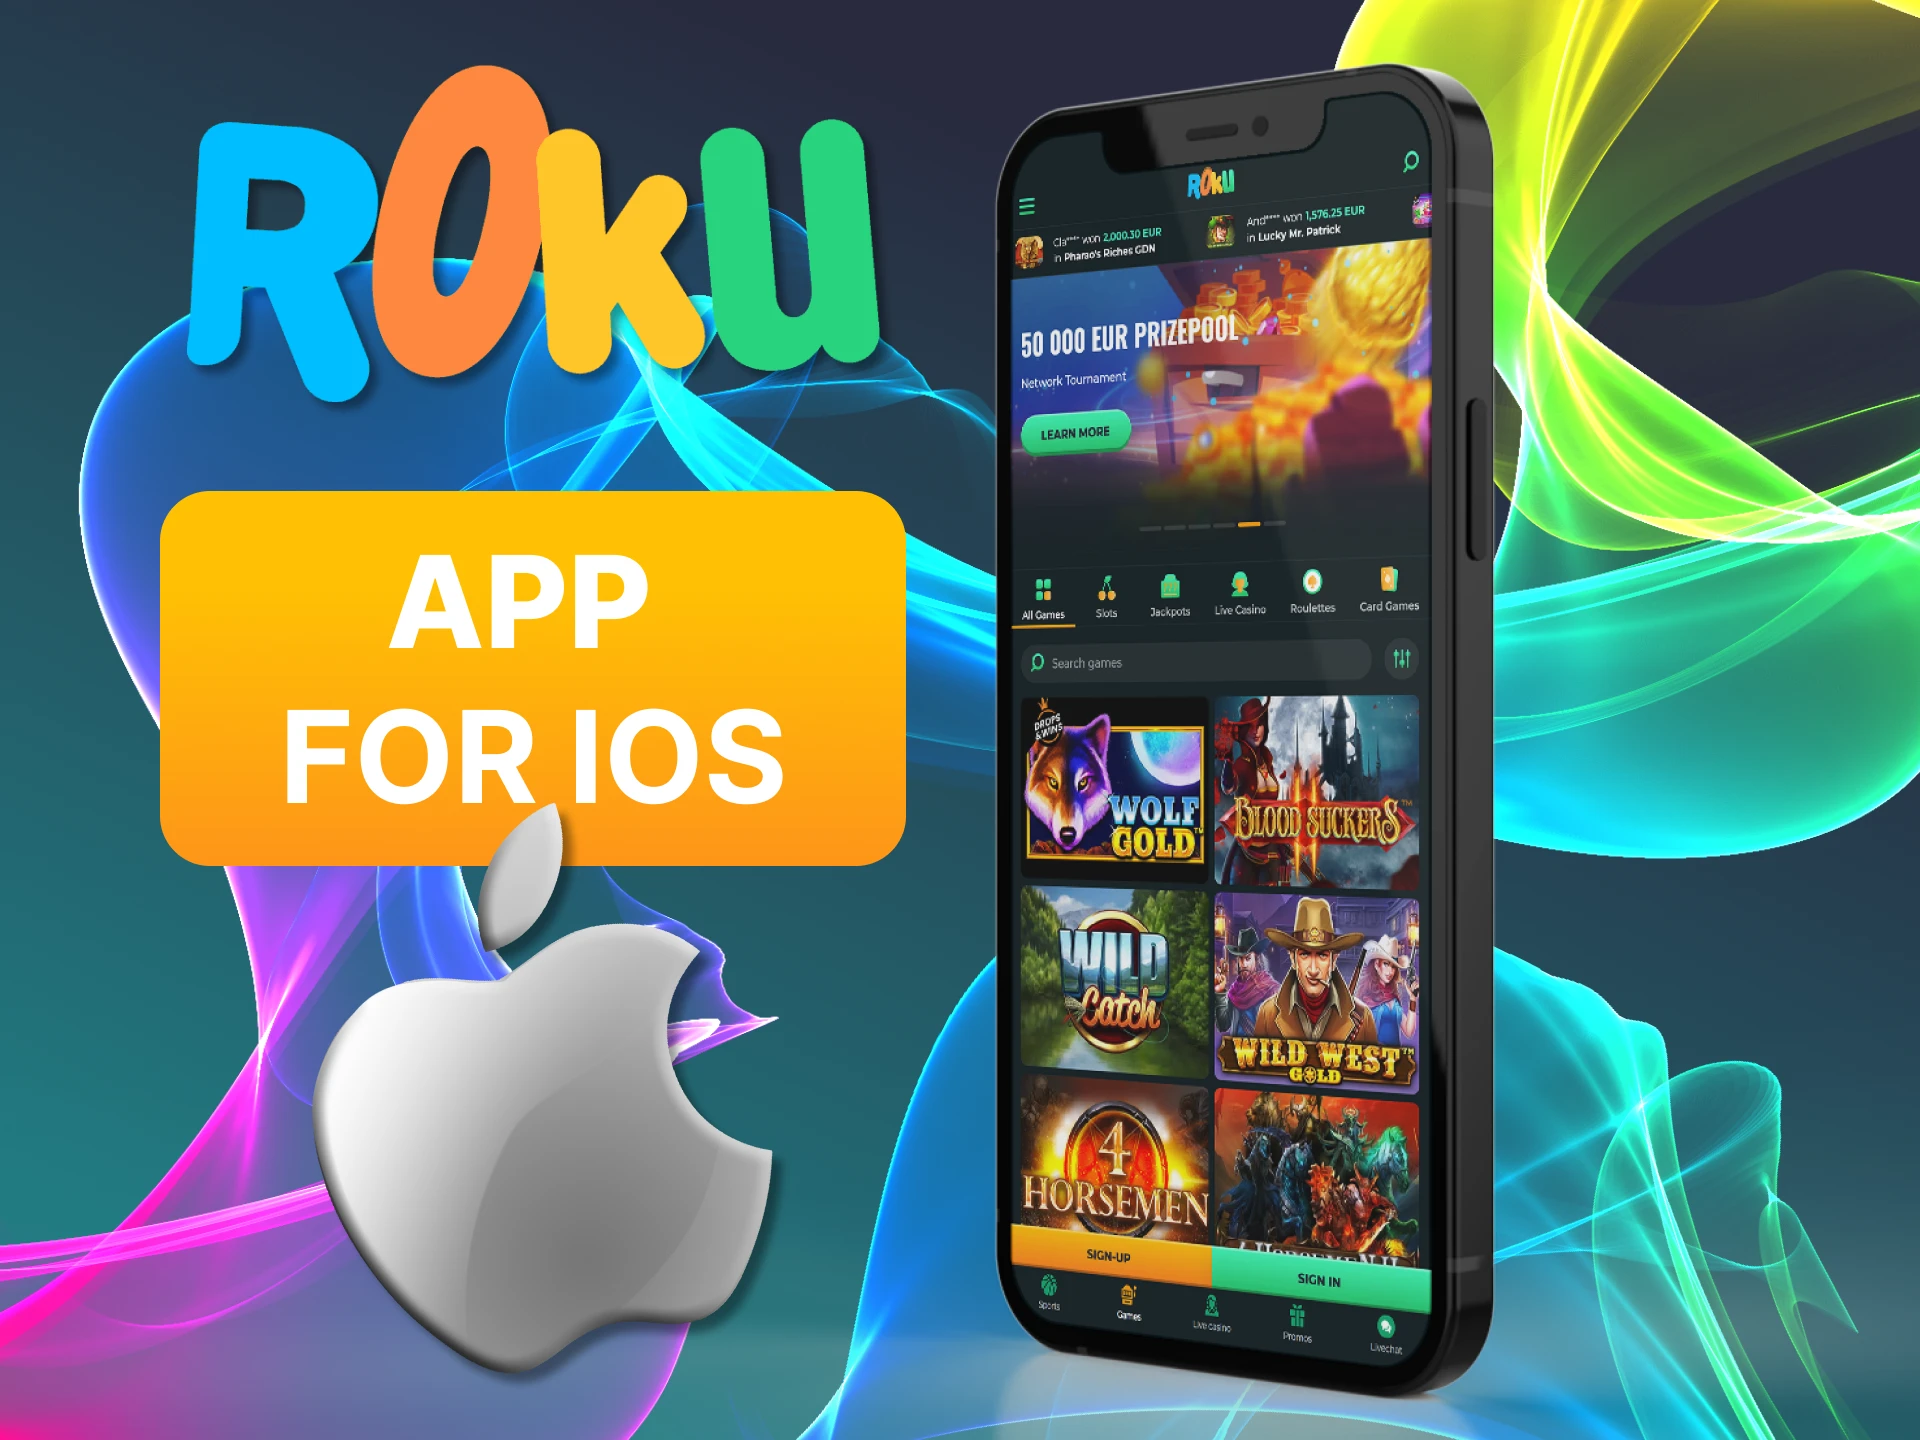 The Rokubet app is available on iOS devices.